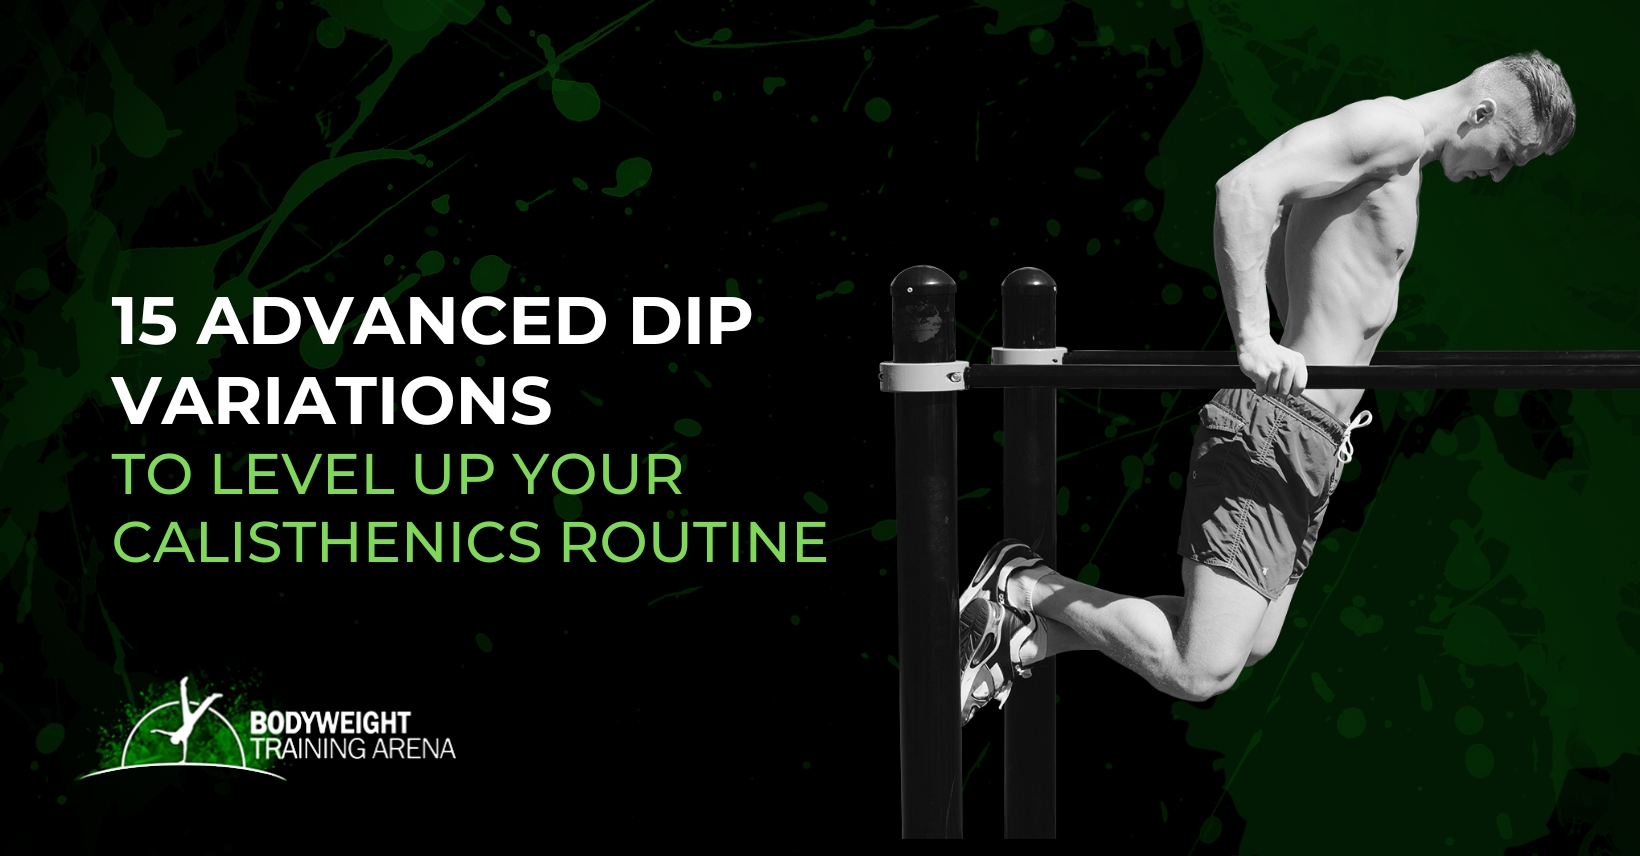 15_Advanced_Dip_Variations_to_Level_Up_Your_Calisthenics_Routine